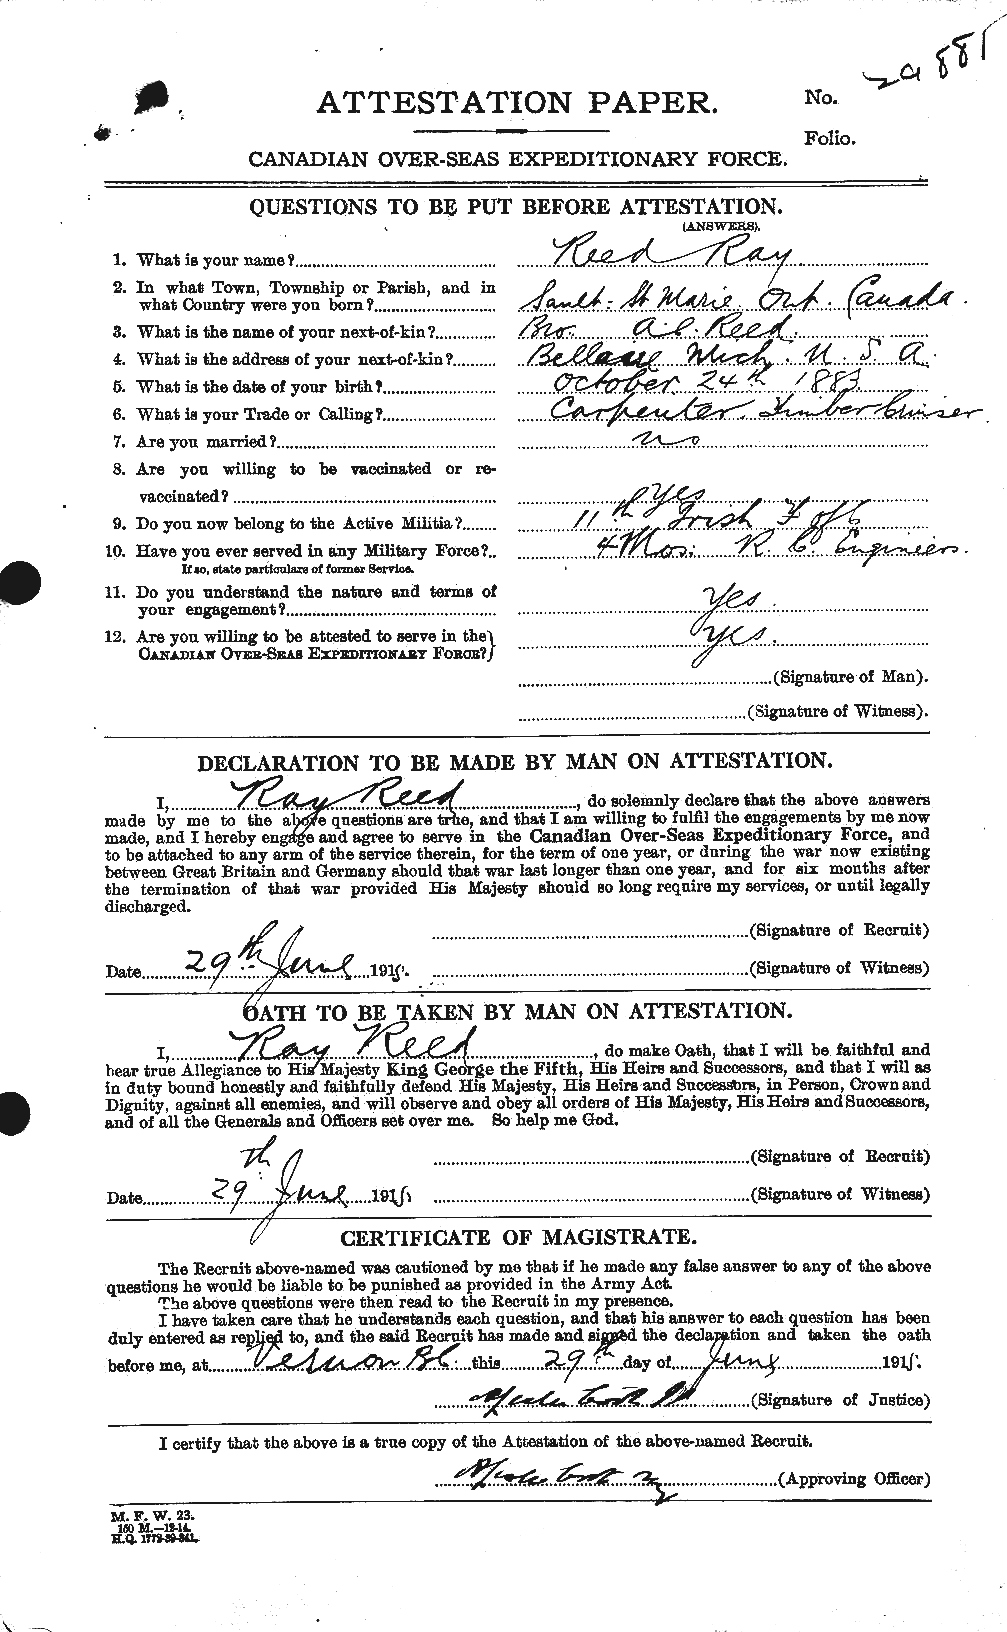 Personnel Records of the First World War - CEF 596481a